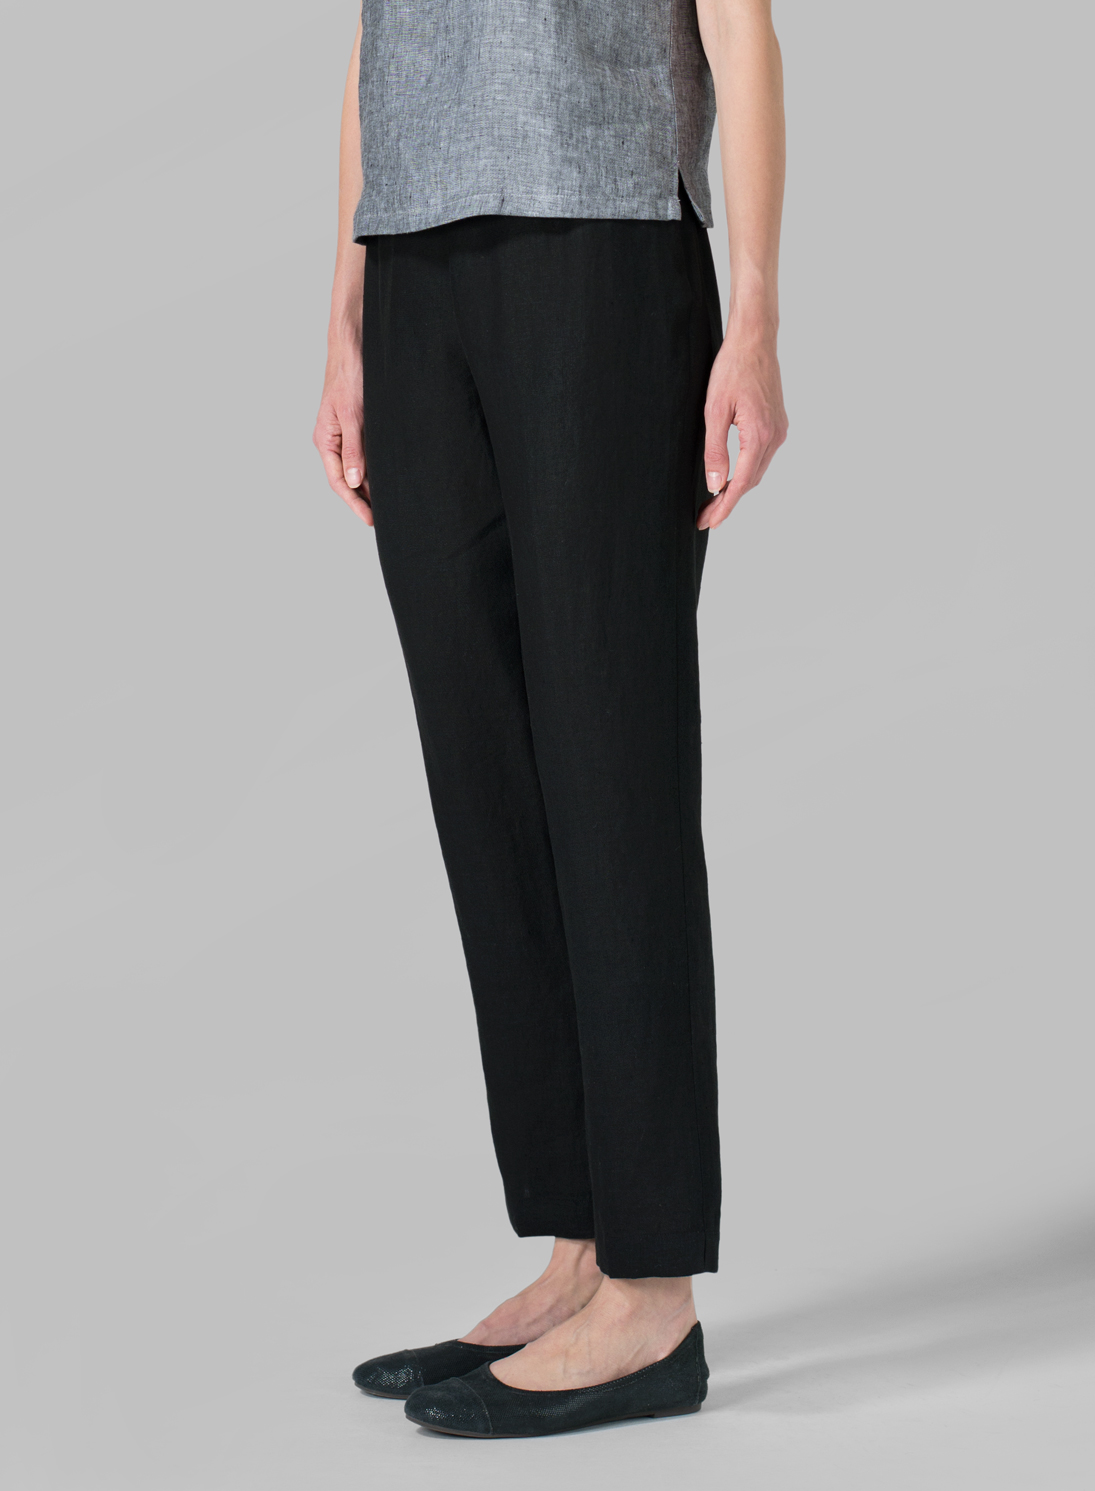 Linen Narrow Ankle Length Cropped Trousers - Plus Size